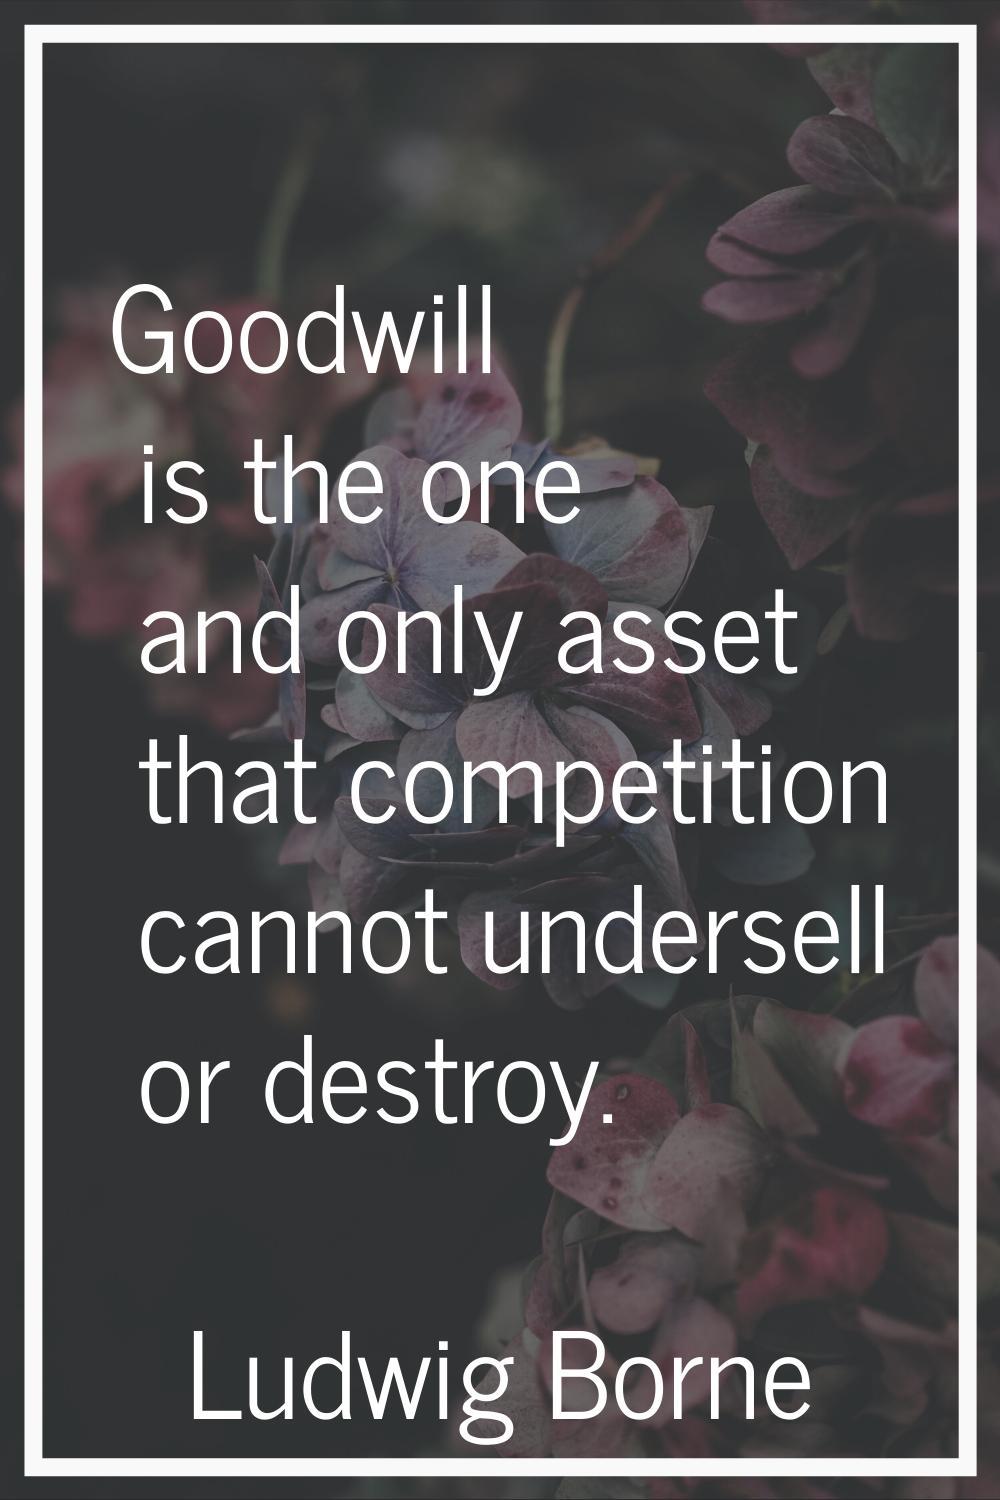 Goodwill is the one and only asset that competition cannot undersell or destroy.